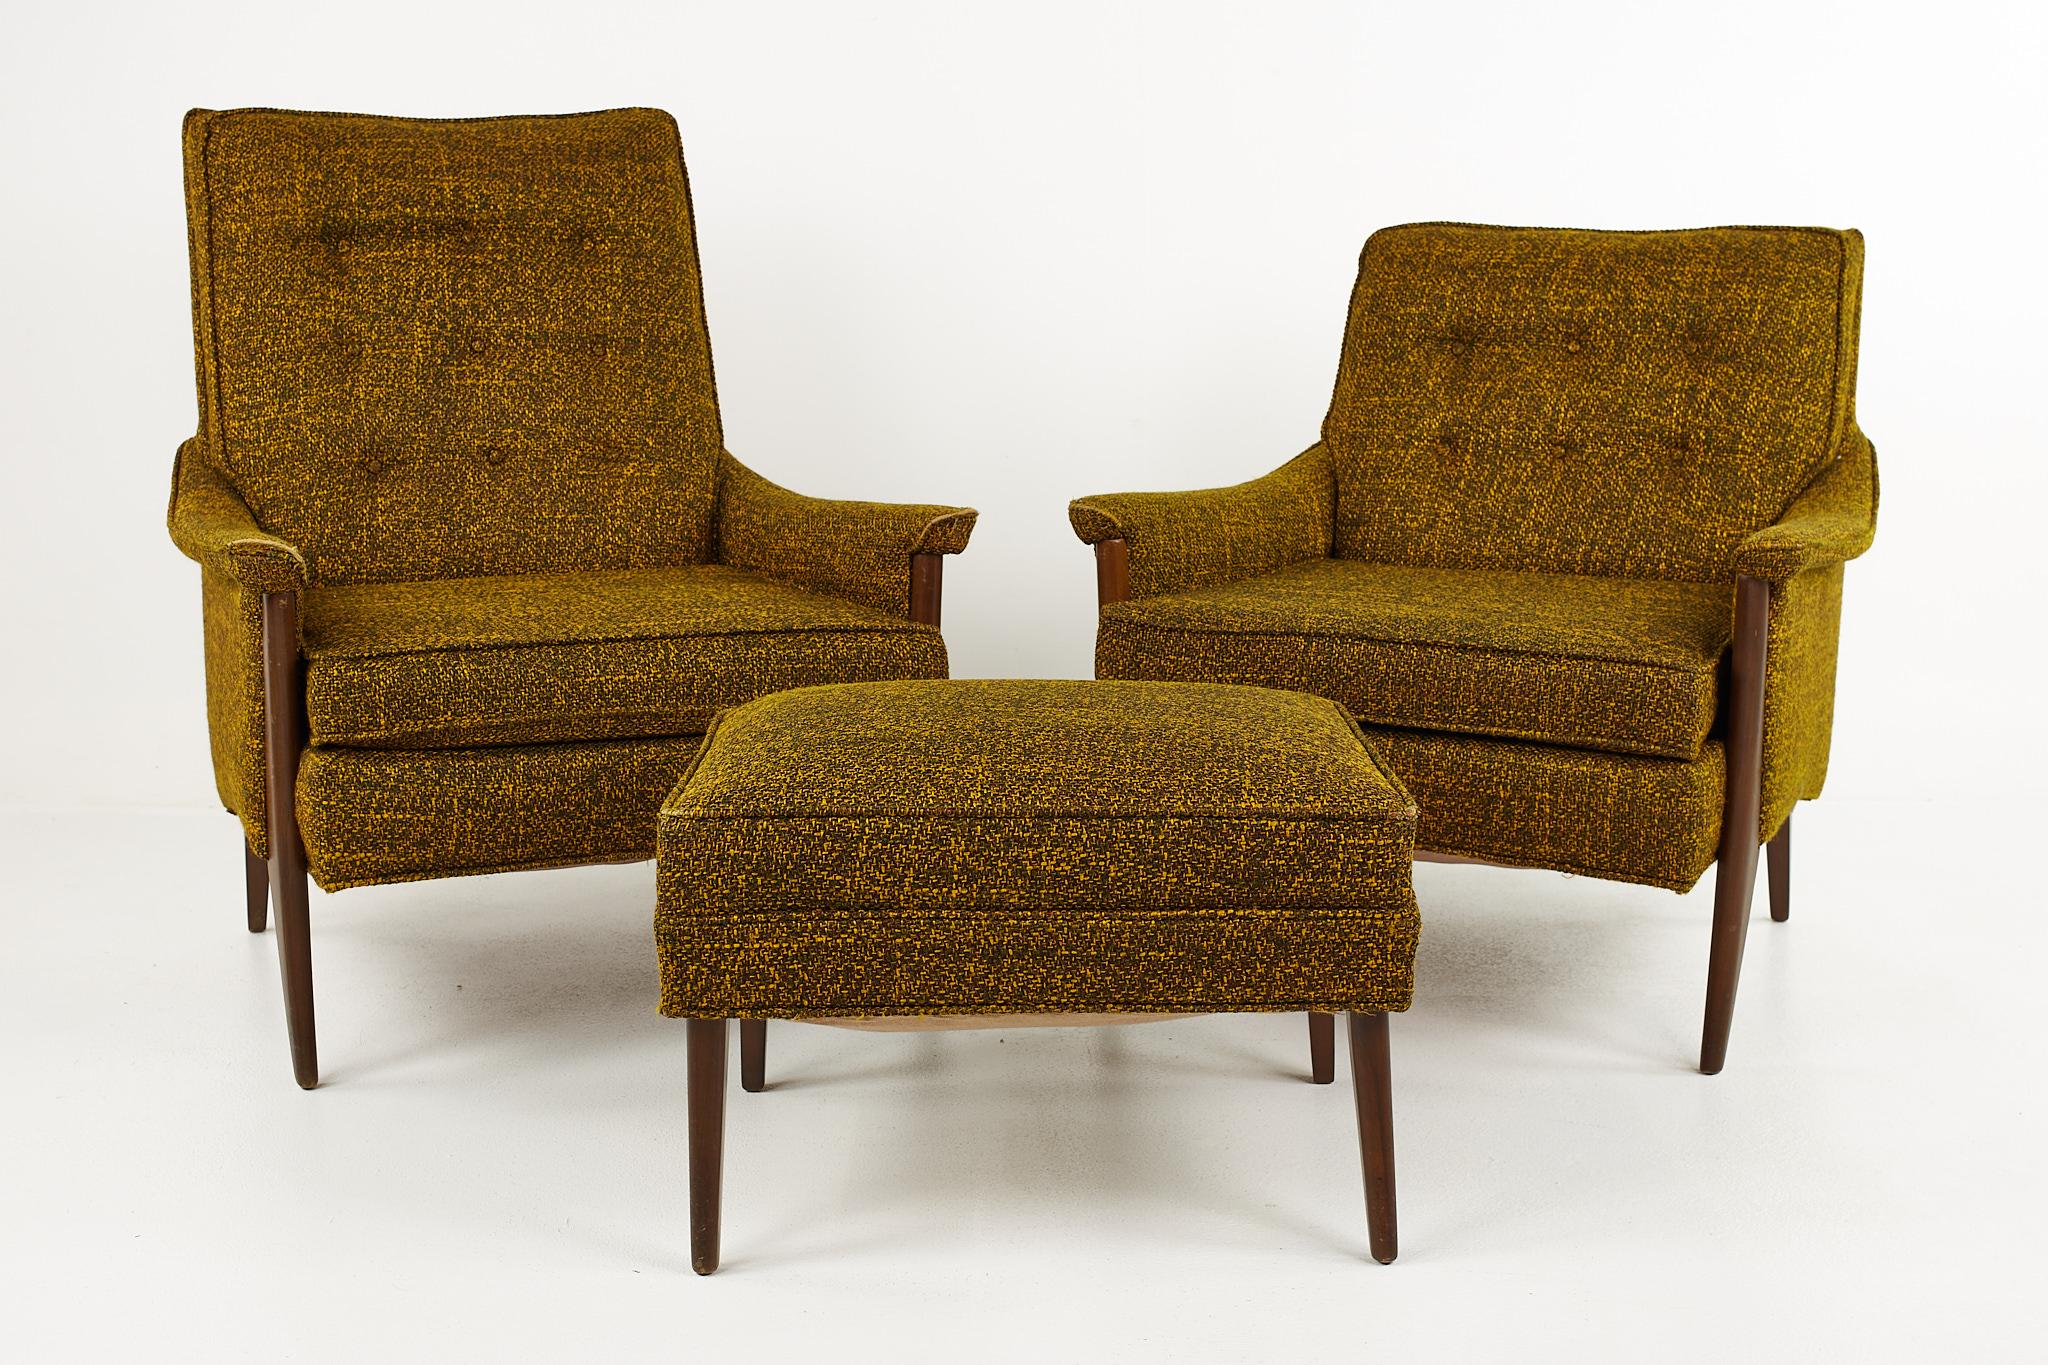 Adrian Pearsall style Kroehler mid century his and hers lounge chairs and ottoman

Each chair measures: 29.5 wide x 28.5 deep x 37 inches high, with a seat height of 15 and arm height of 20 inches high

All pieces of furniture can be had in what